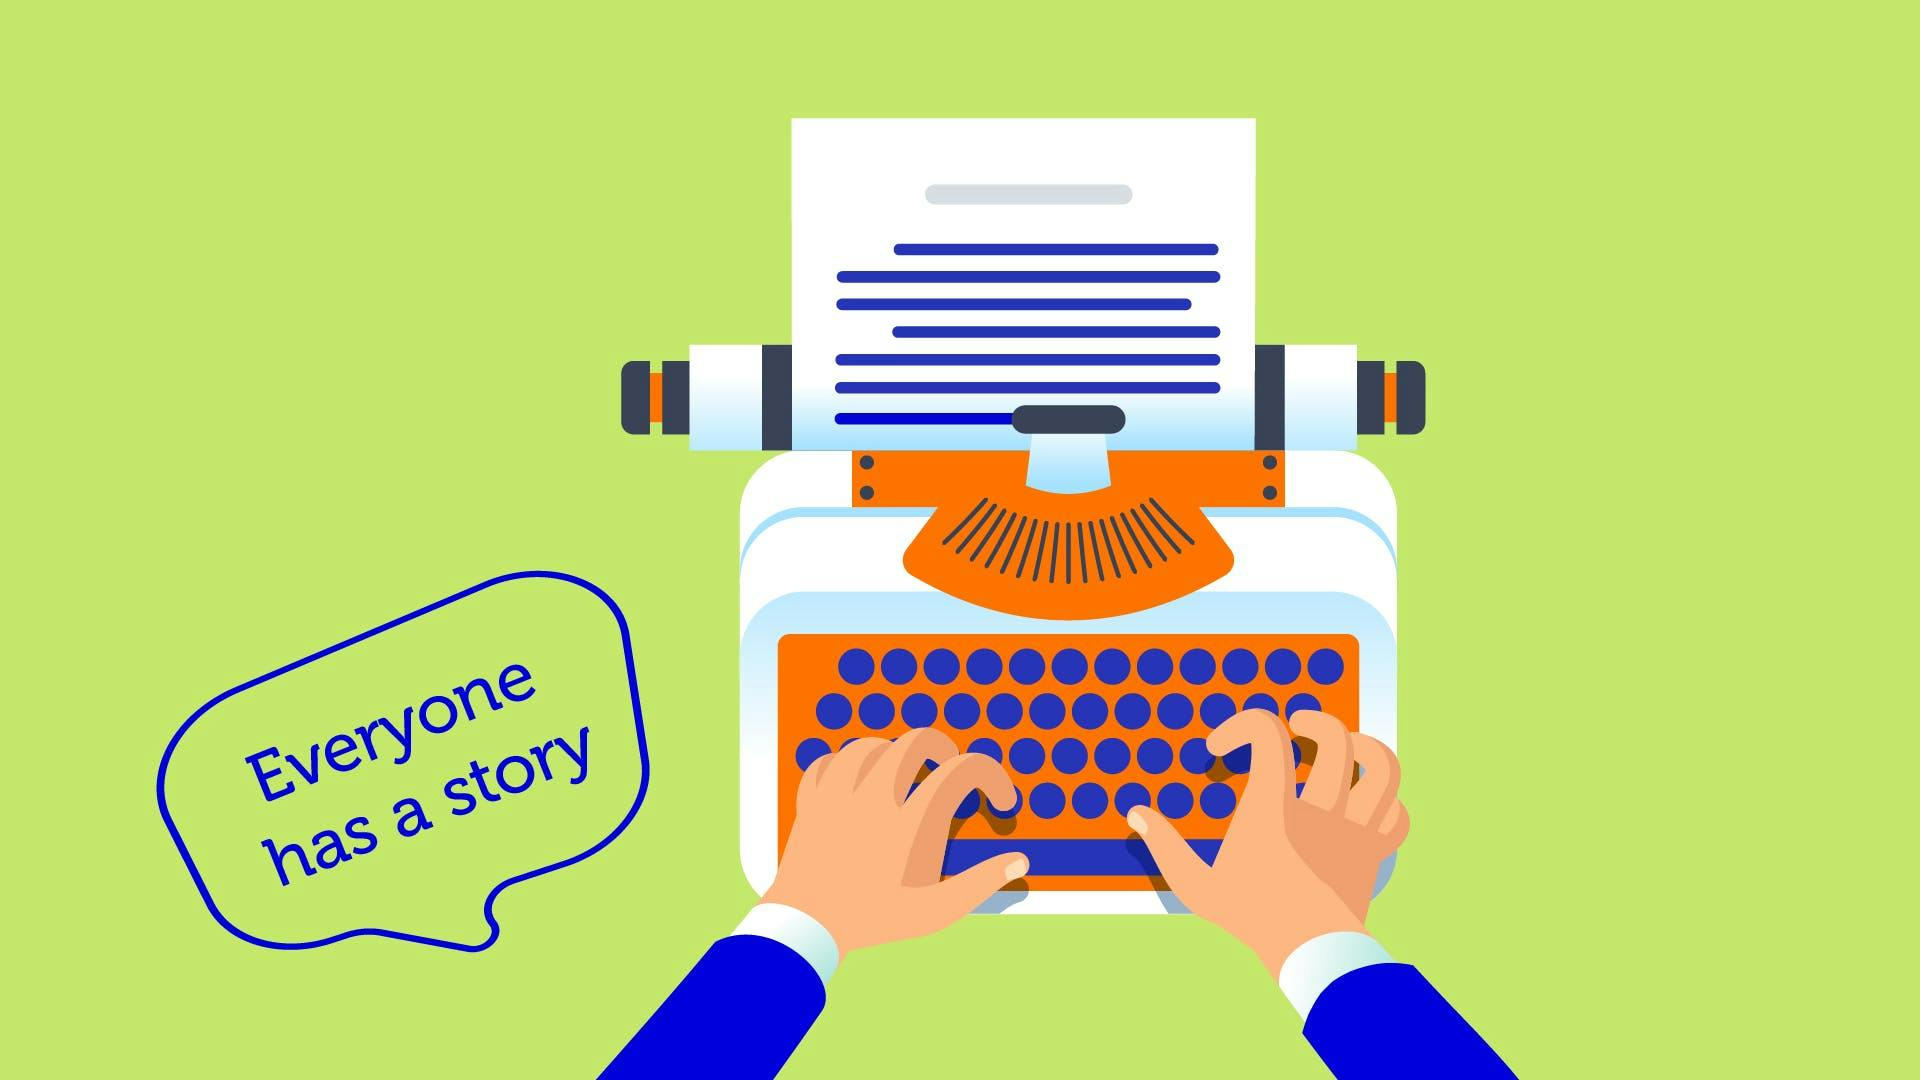 The importance of storytelling in business